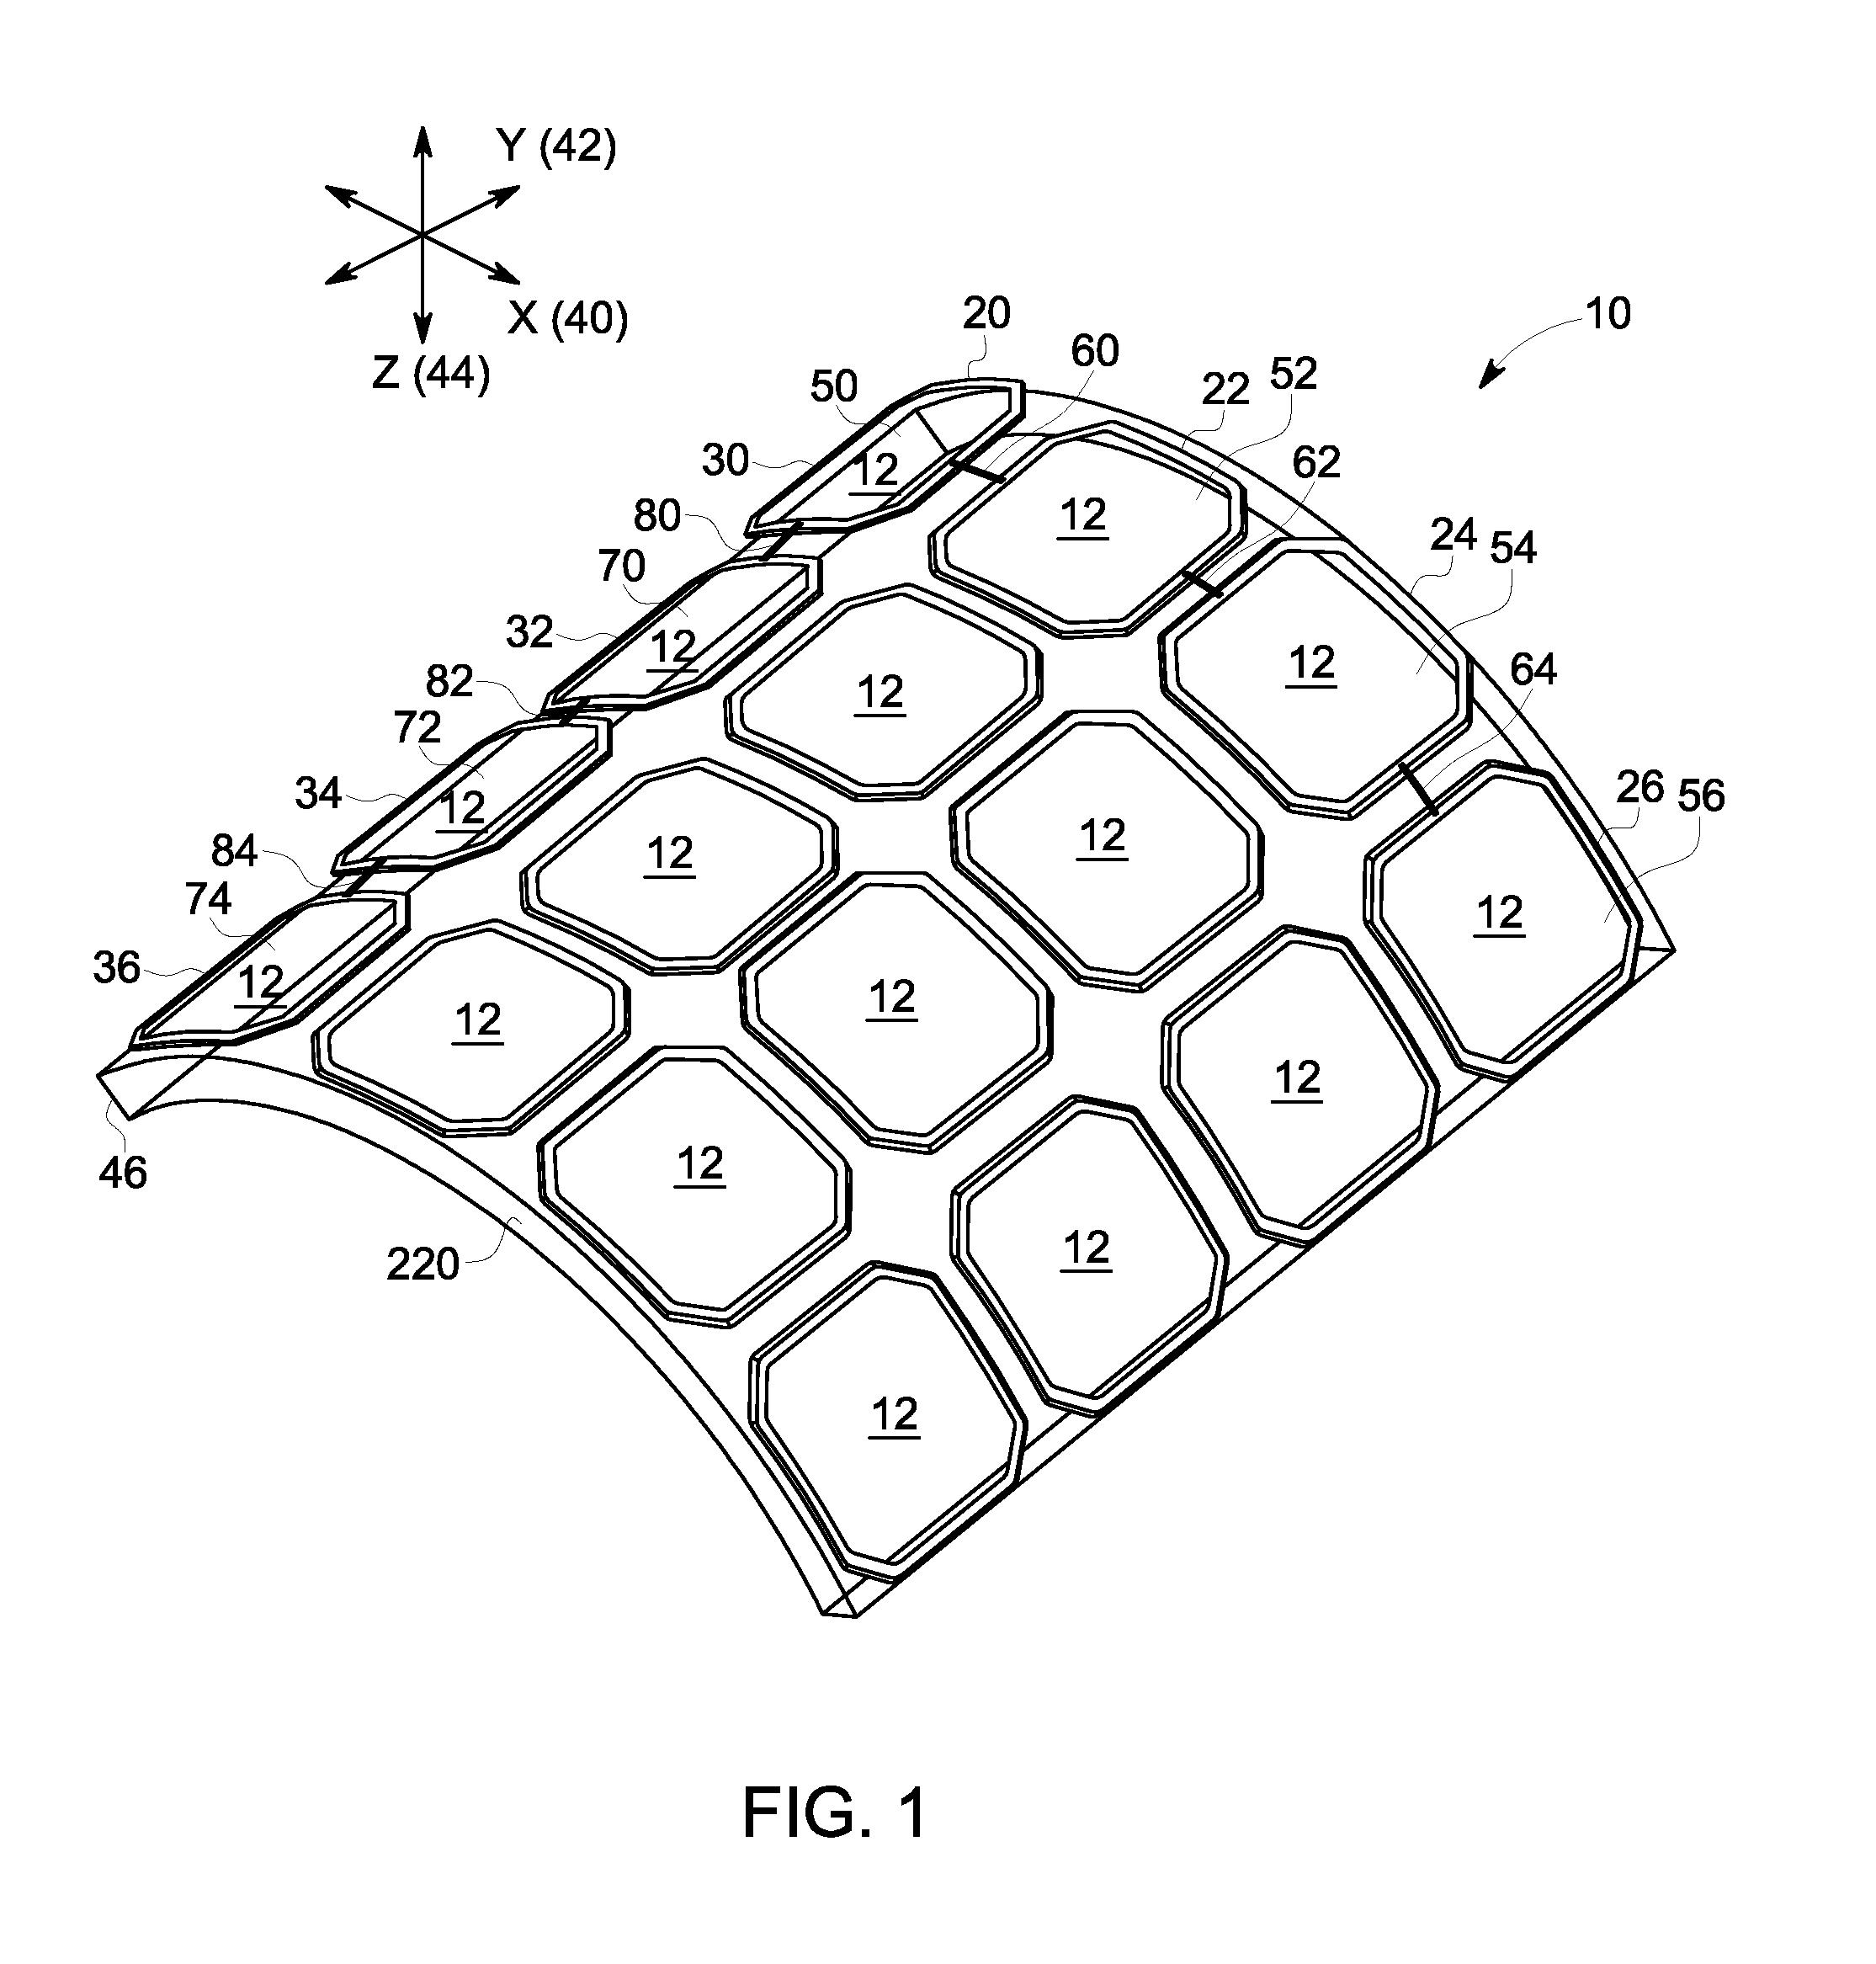 Radio frequency (RF) coil array for a magnetic resonance imaging system